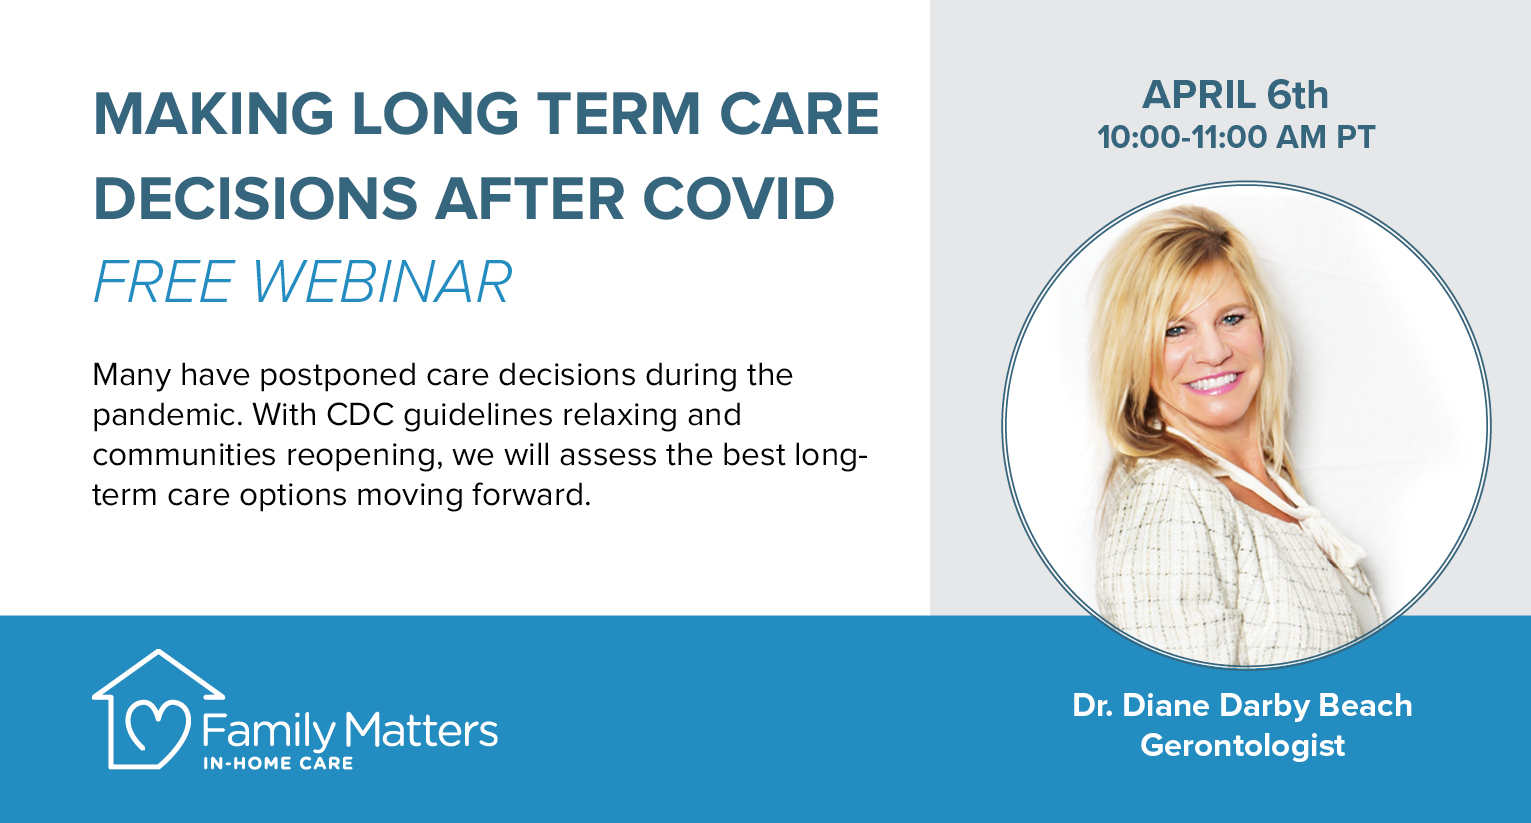 Free Webinar: Making Long-Term Care Decisions After COVID